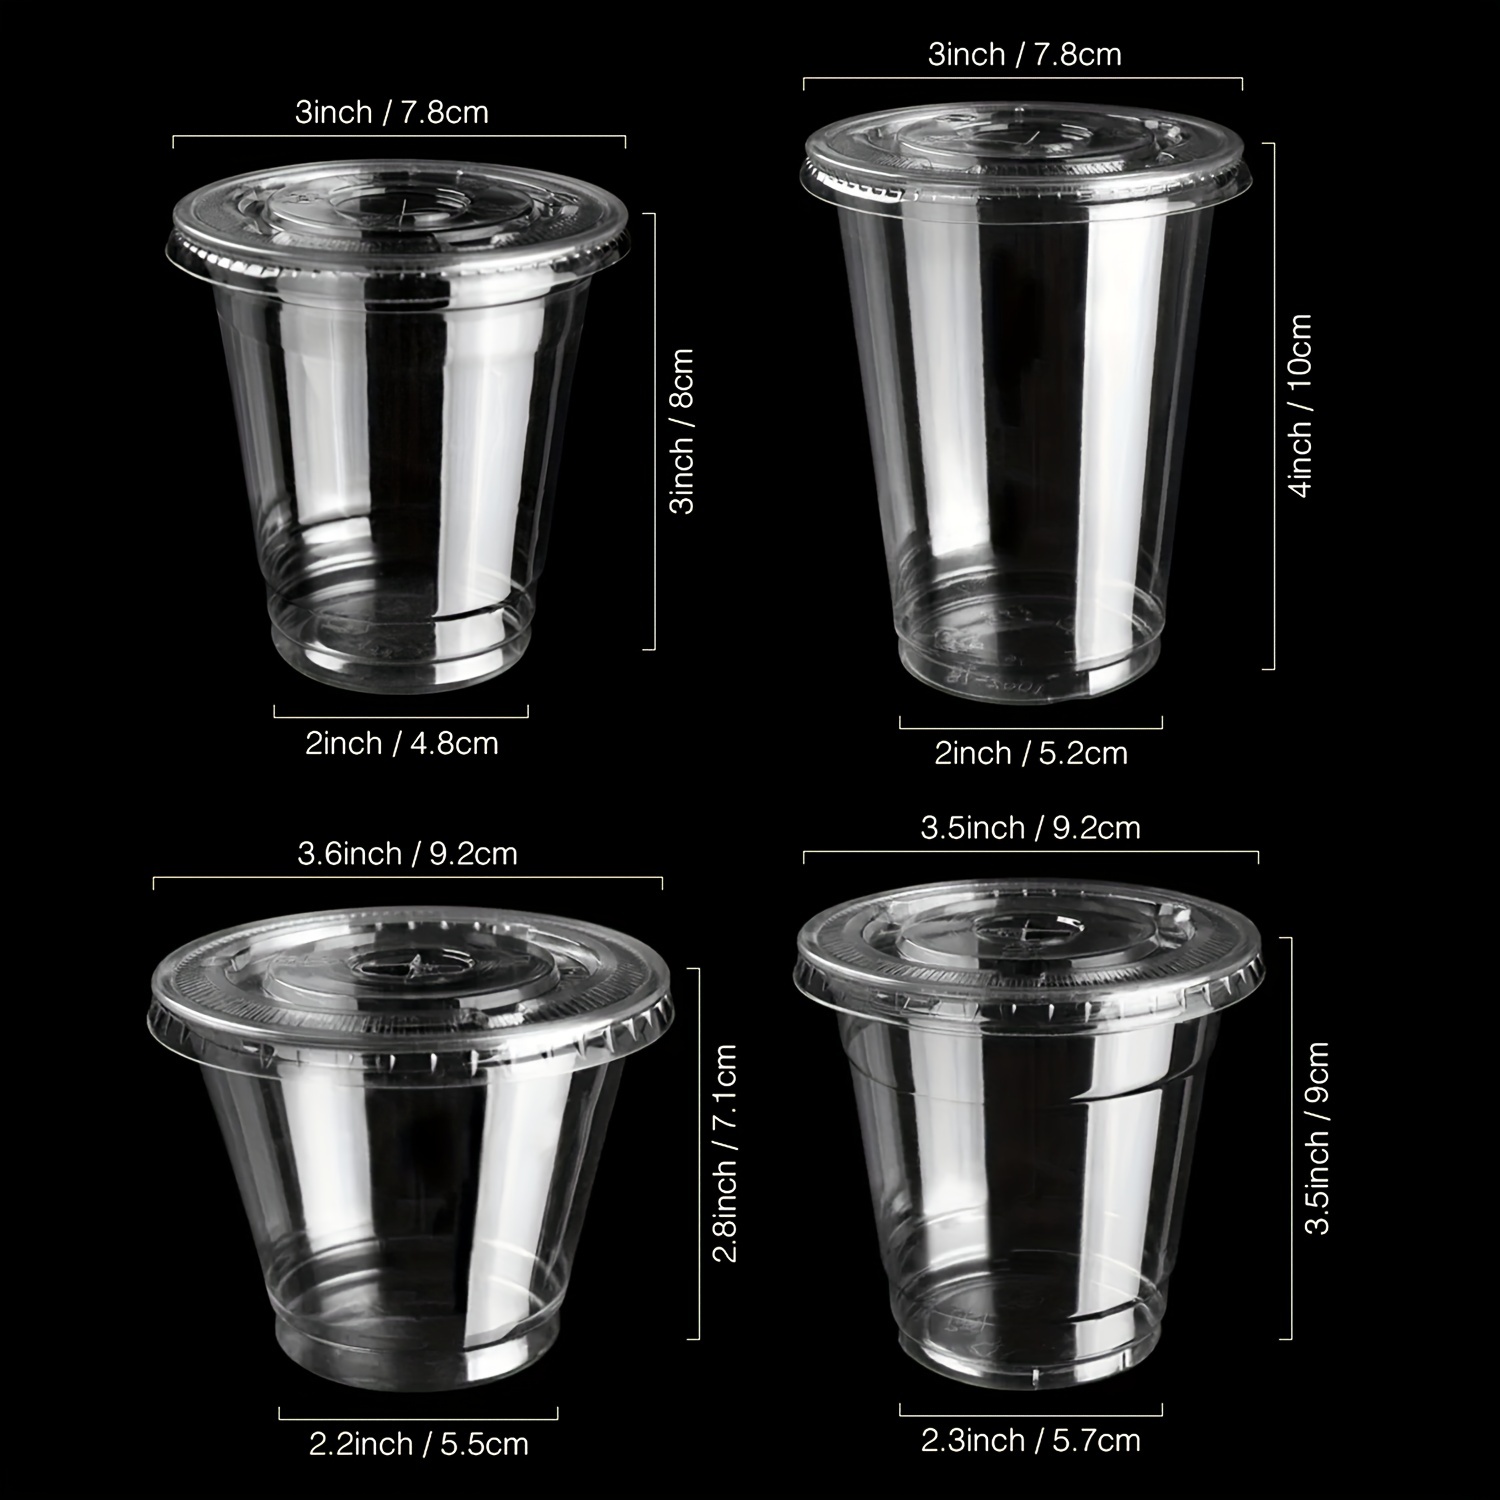 Disposable Drinkware, Cups, Lids & Glasses